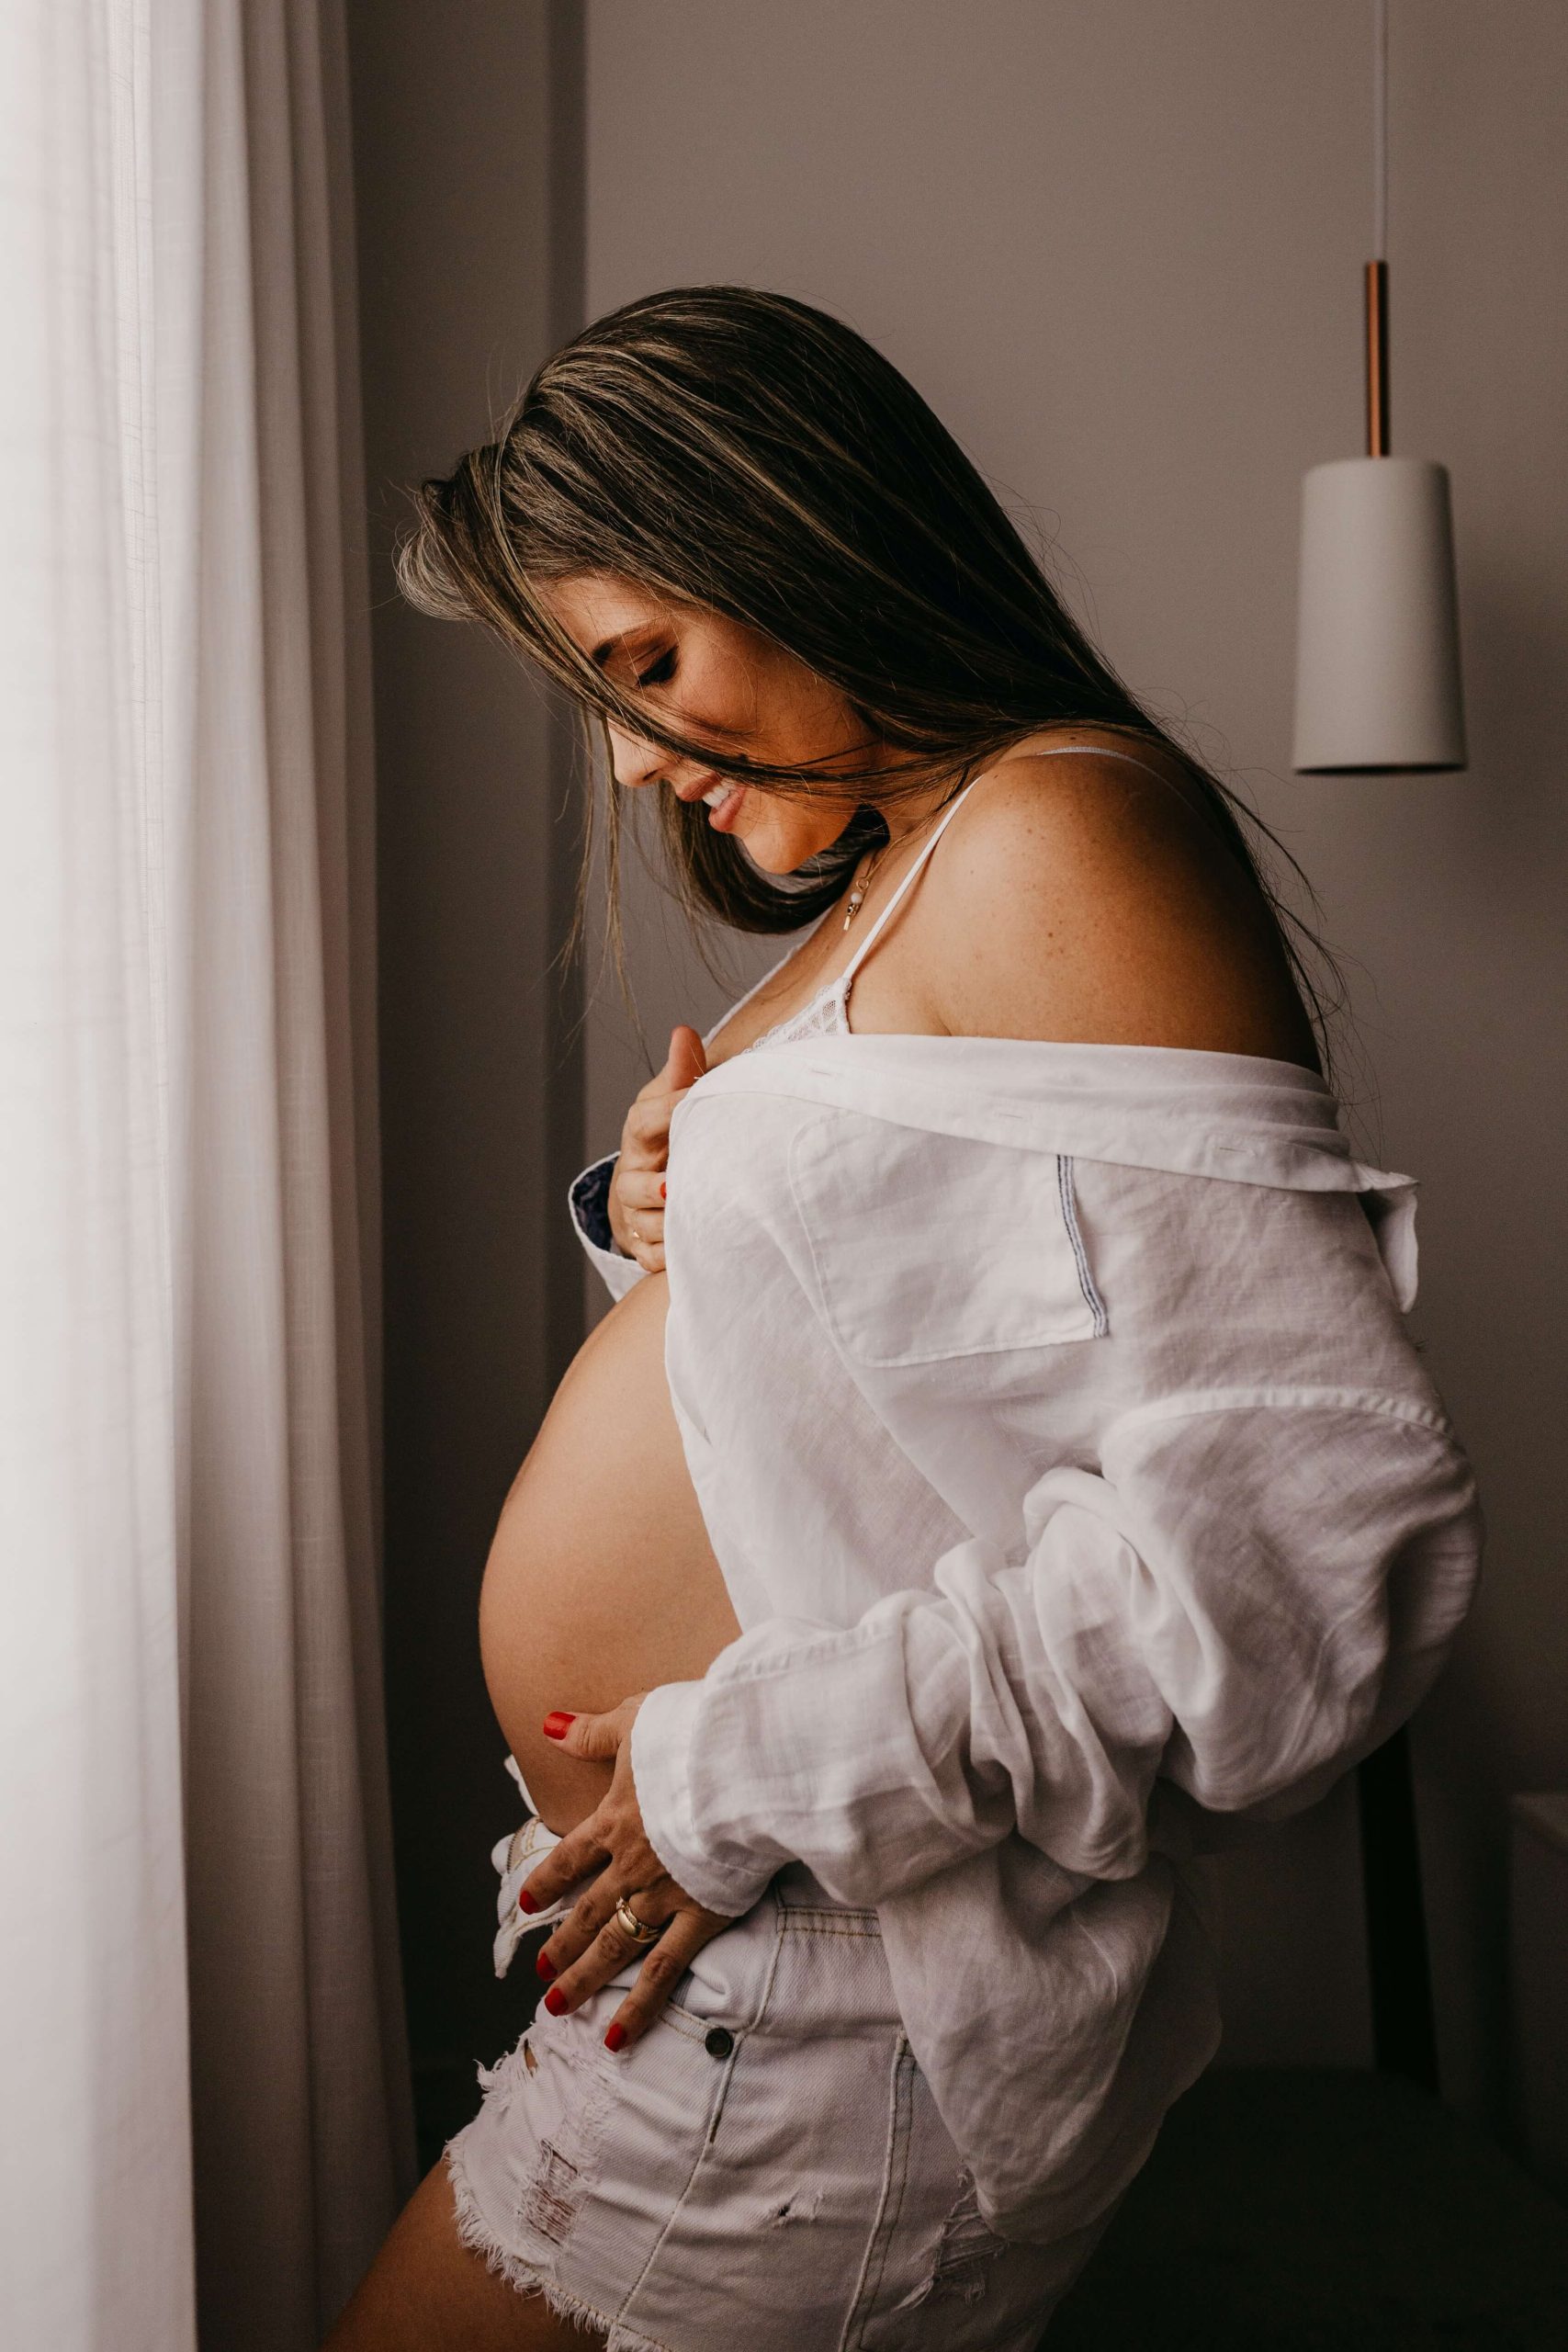 Importance Of Selecting a Maternity Photoshoot Outfit